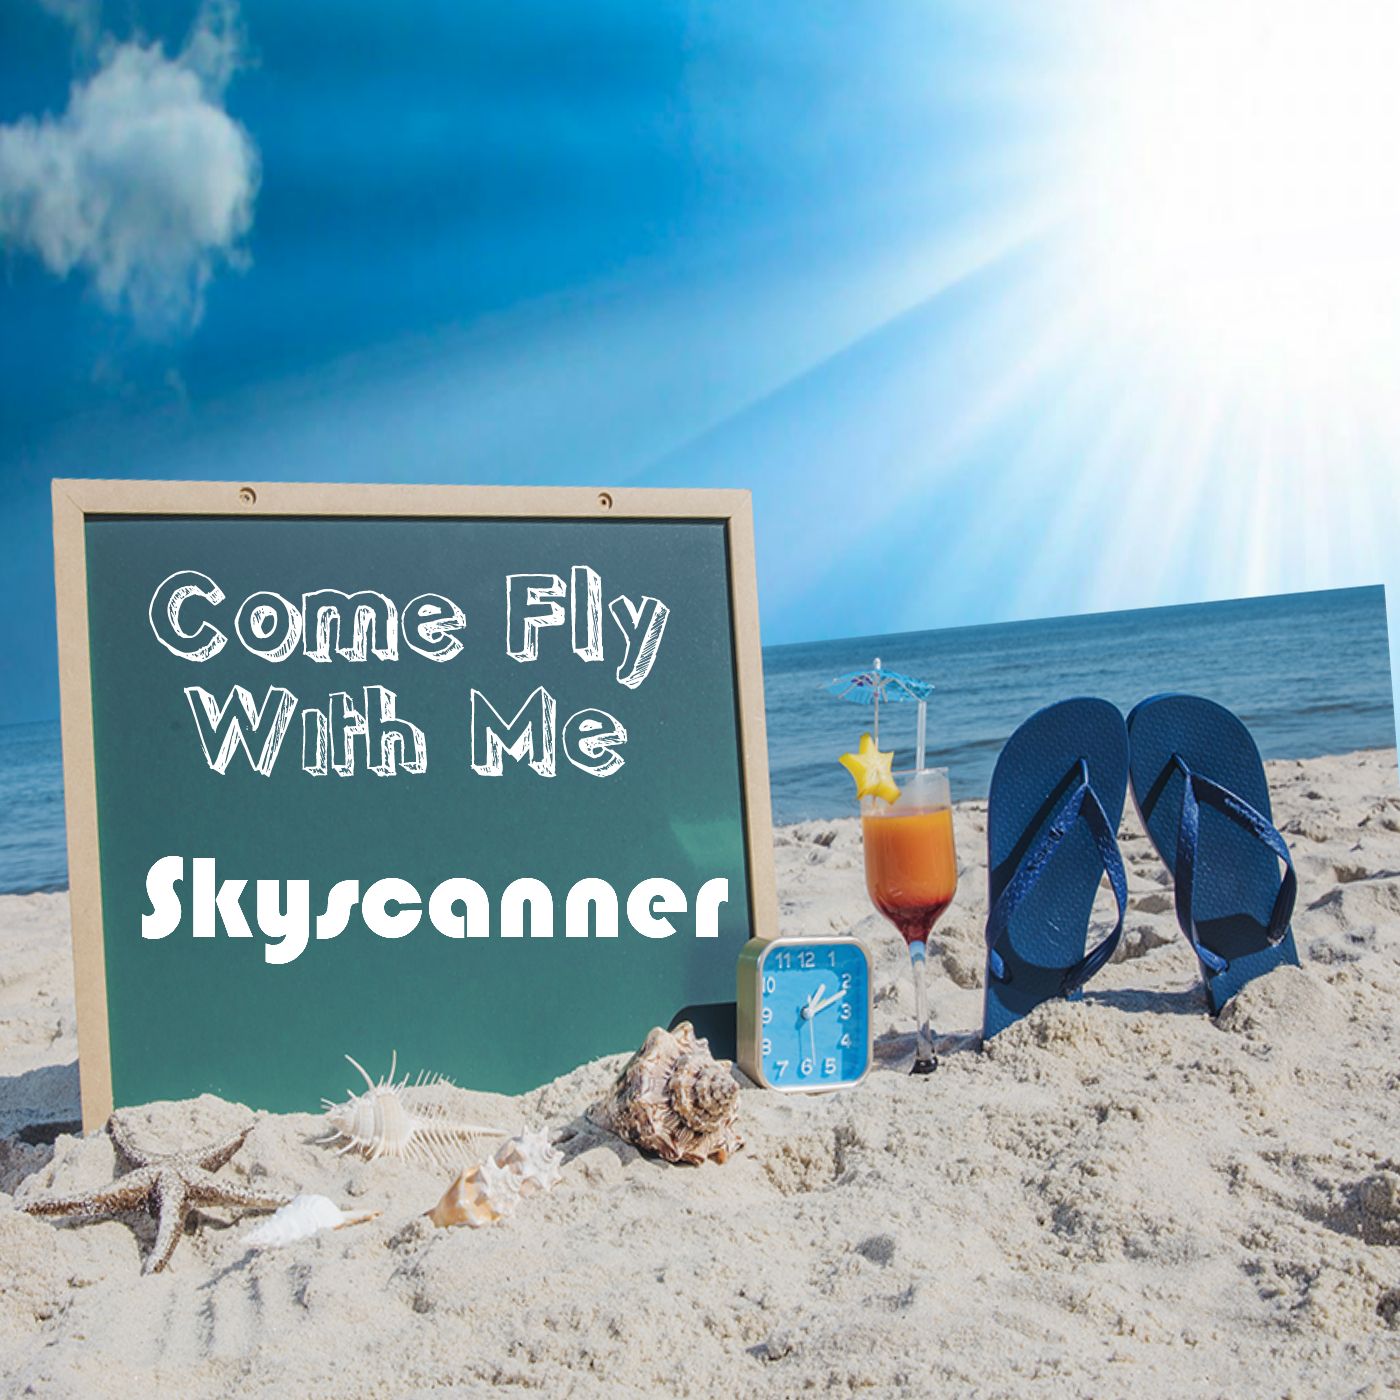 Skyscanner  - The Best Way to get Cheap Flights